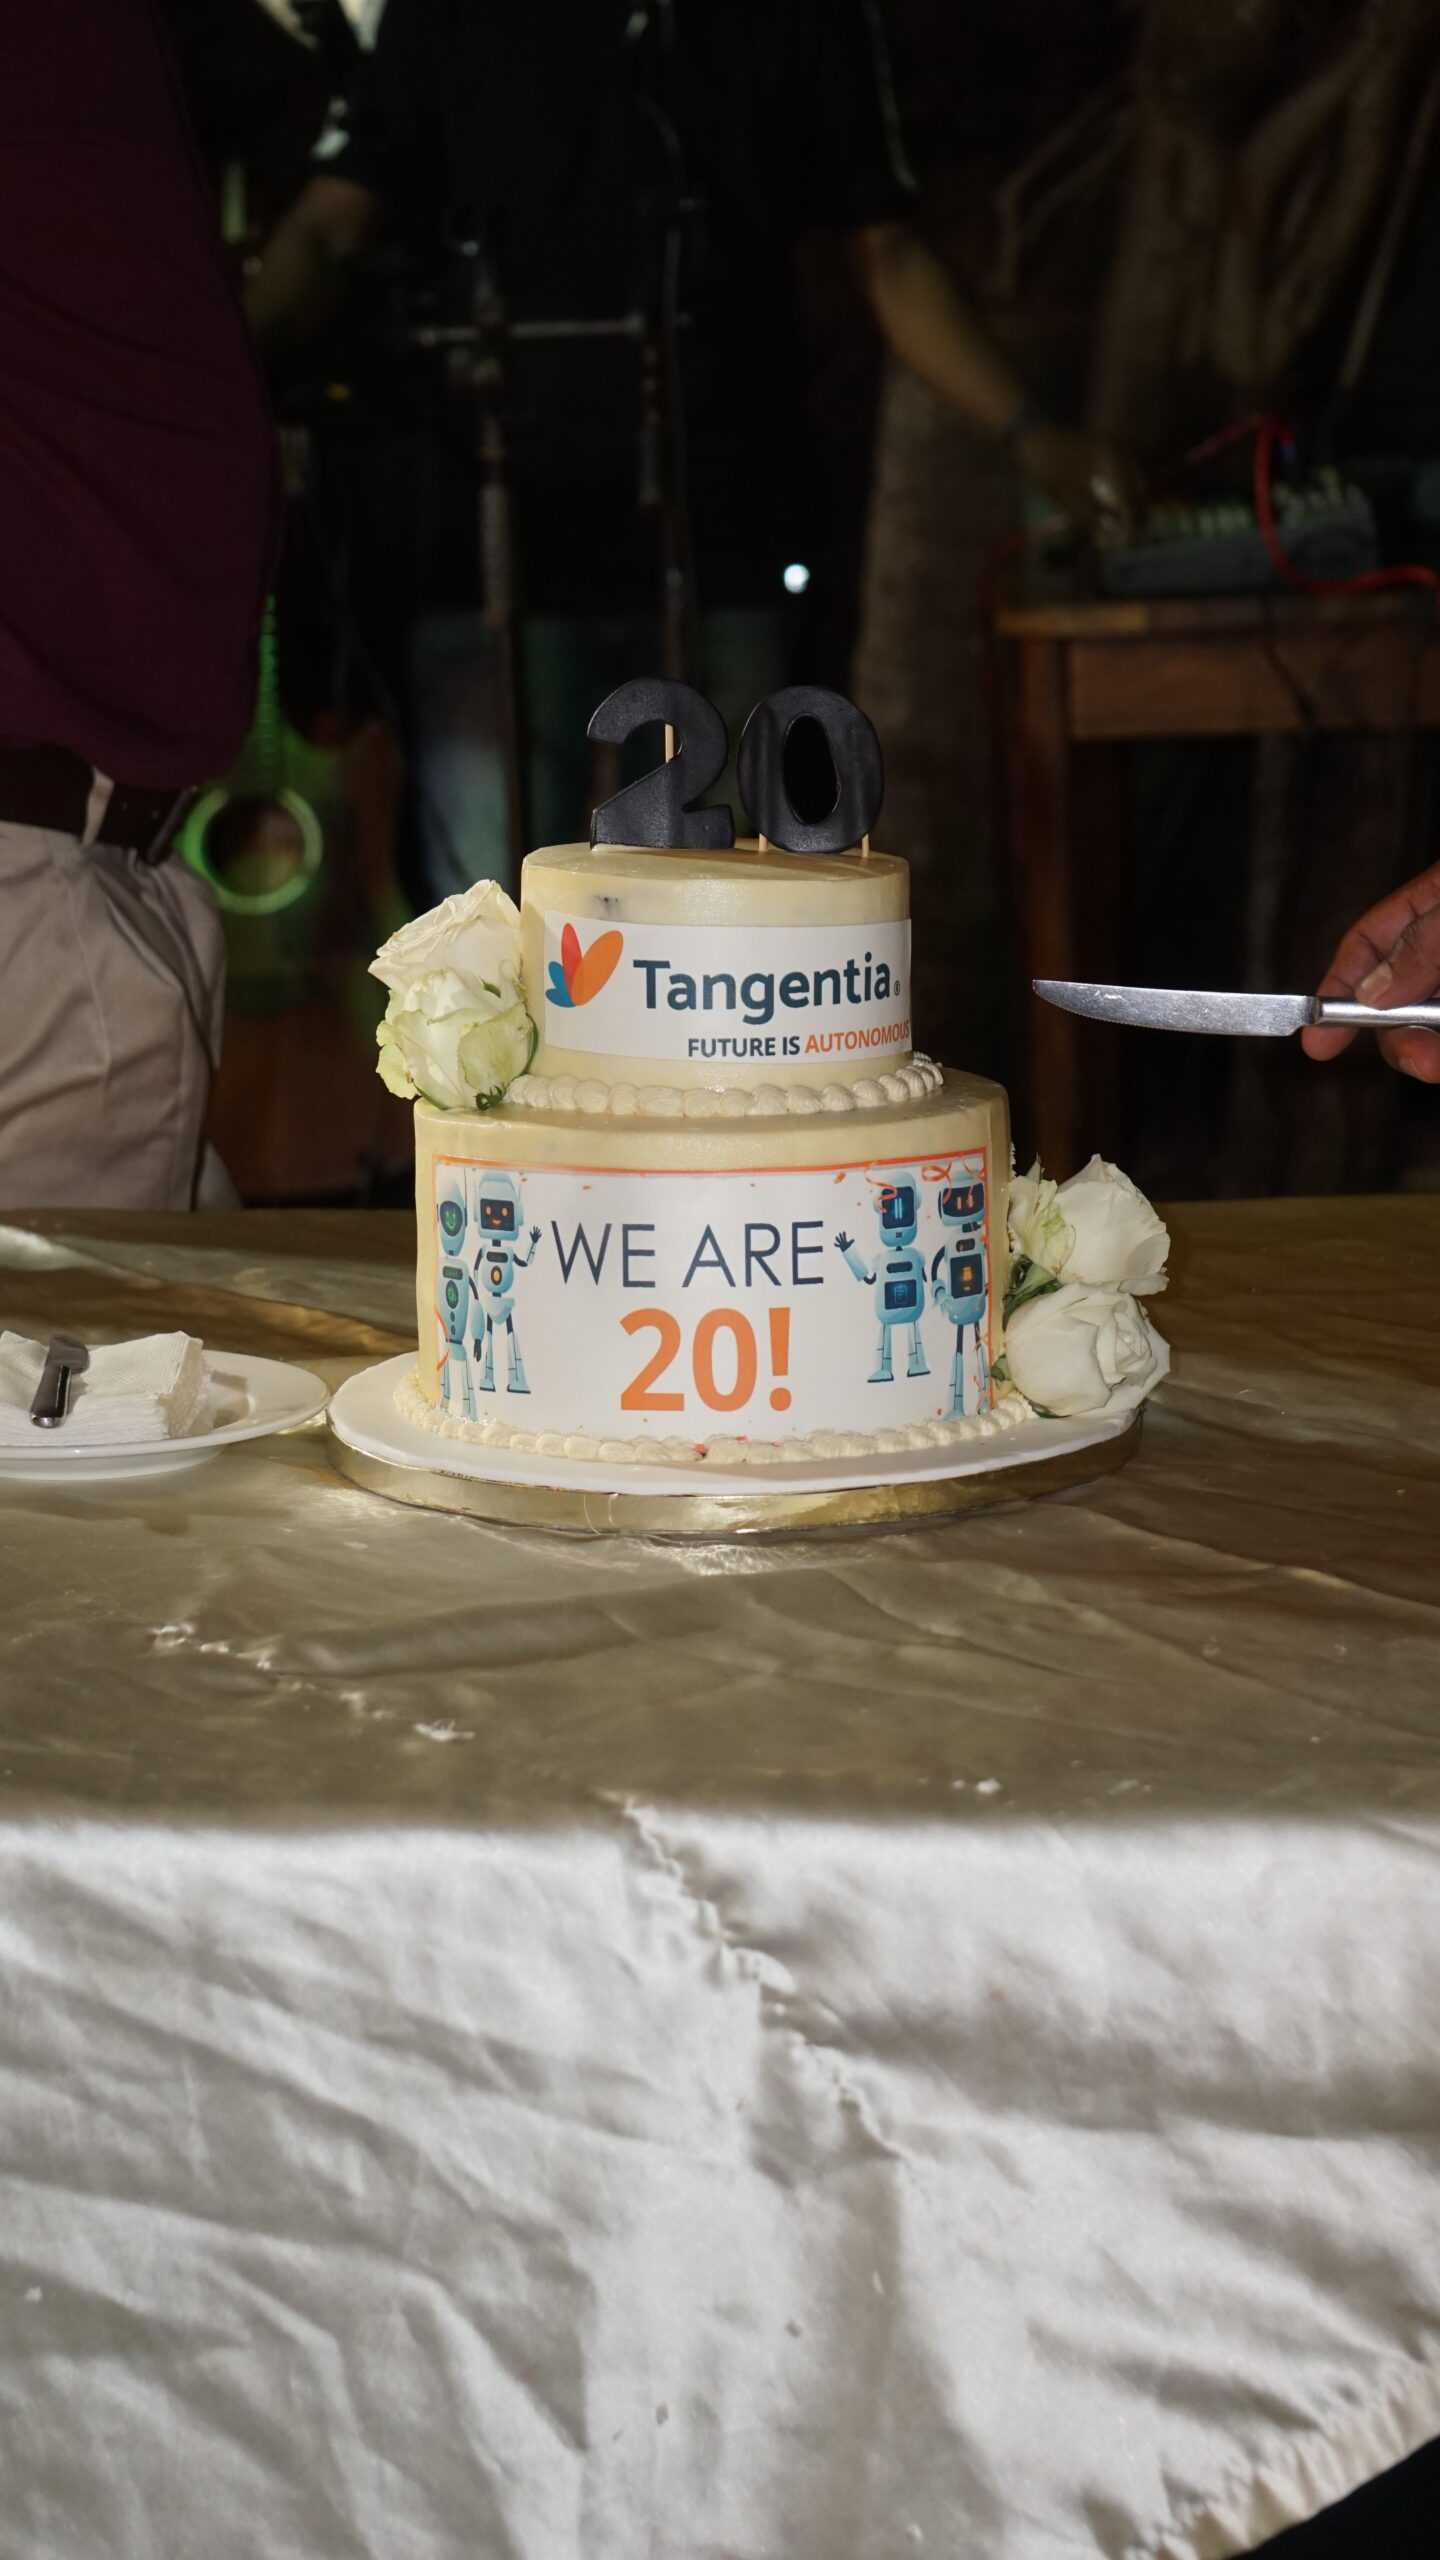 Tangentia | Celebrating 20 Years of Excellence: A Milestone for Tangentia 